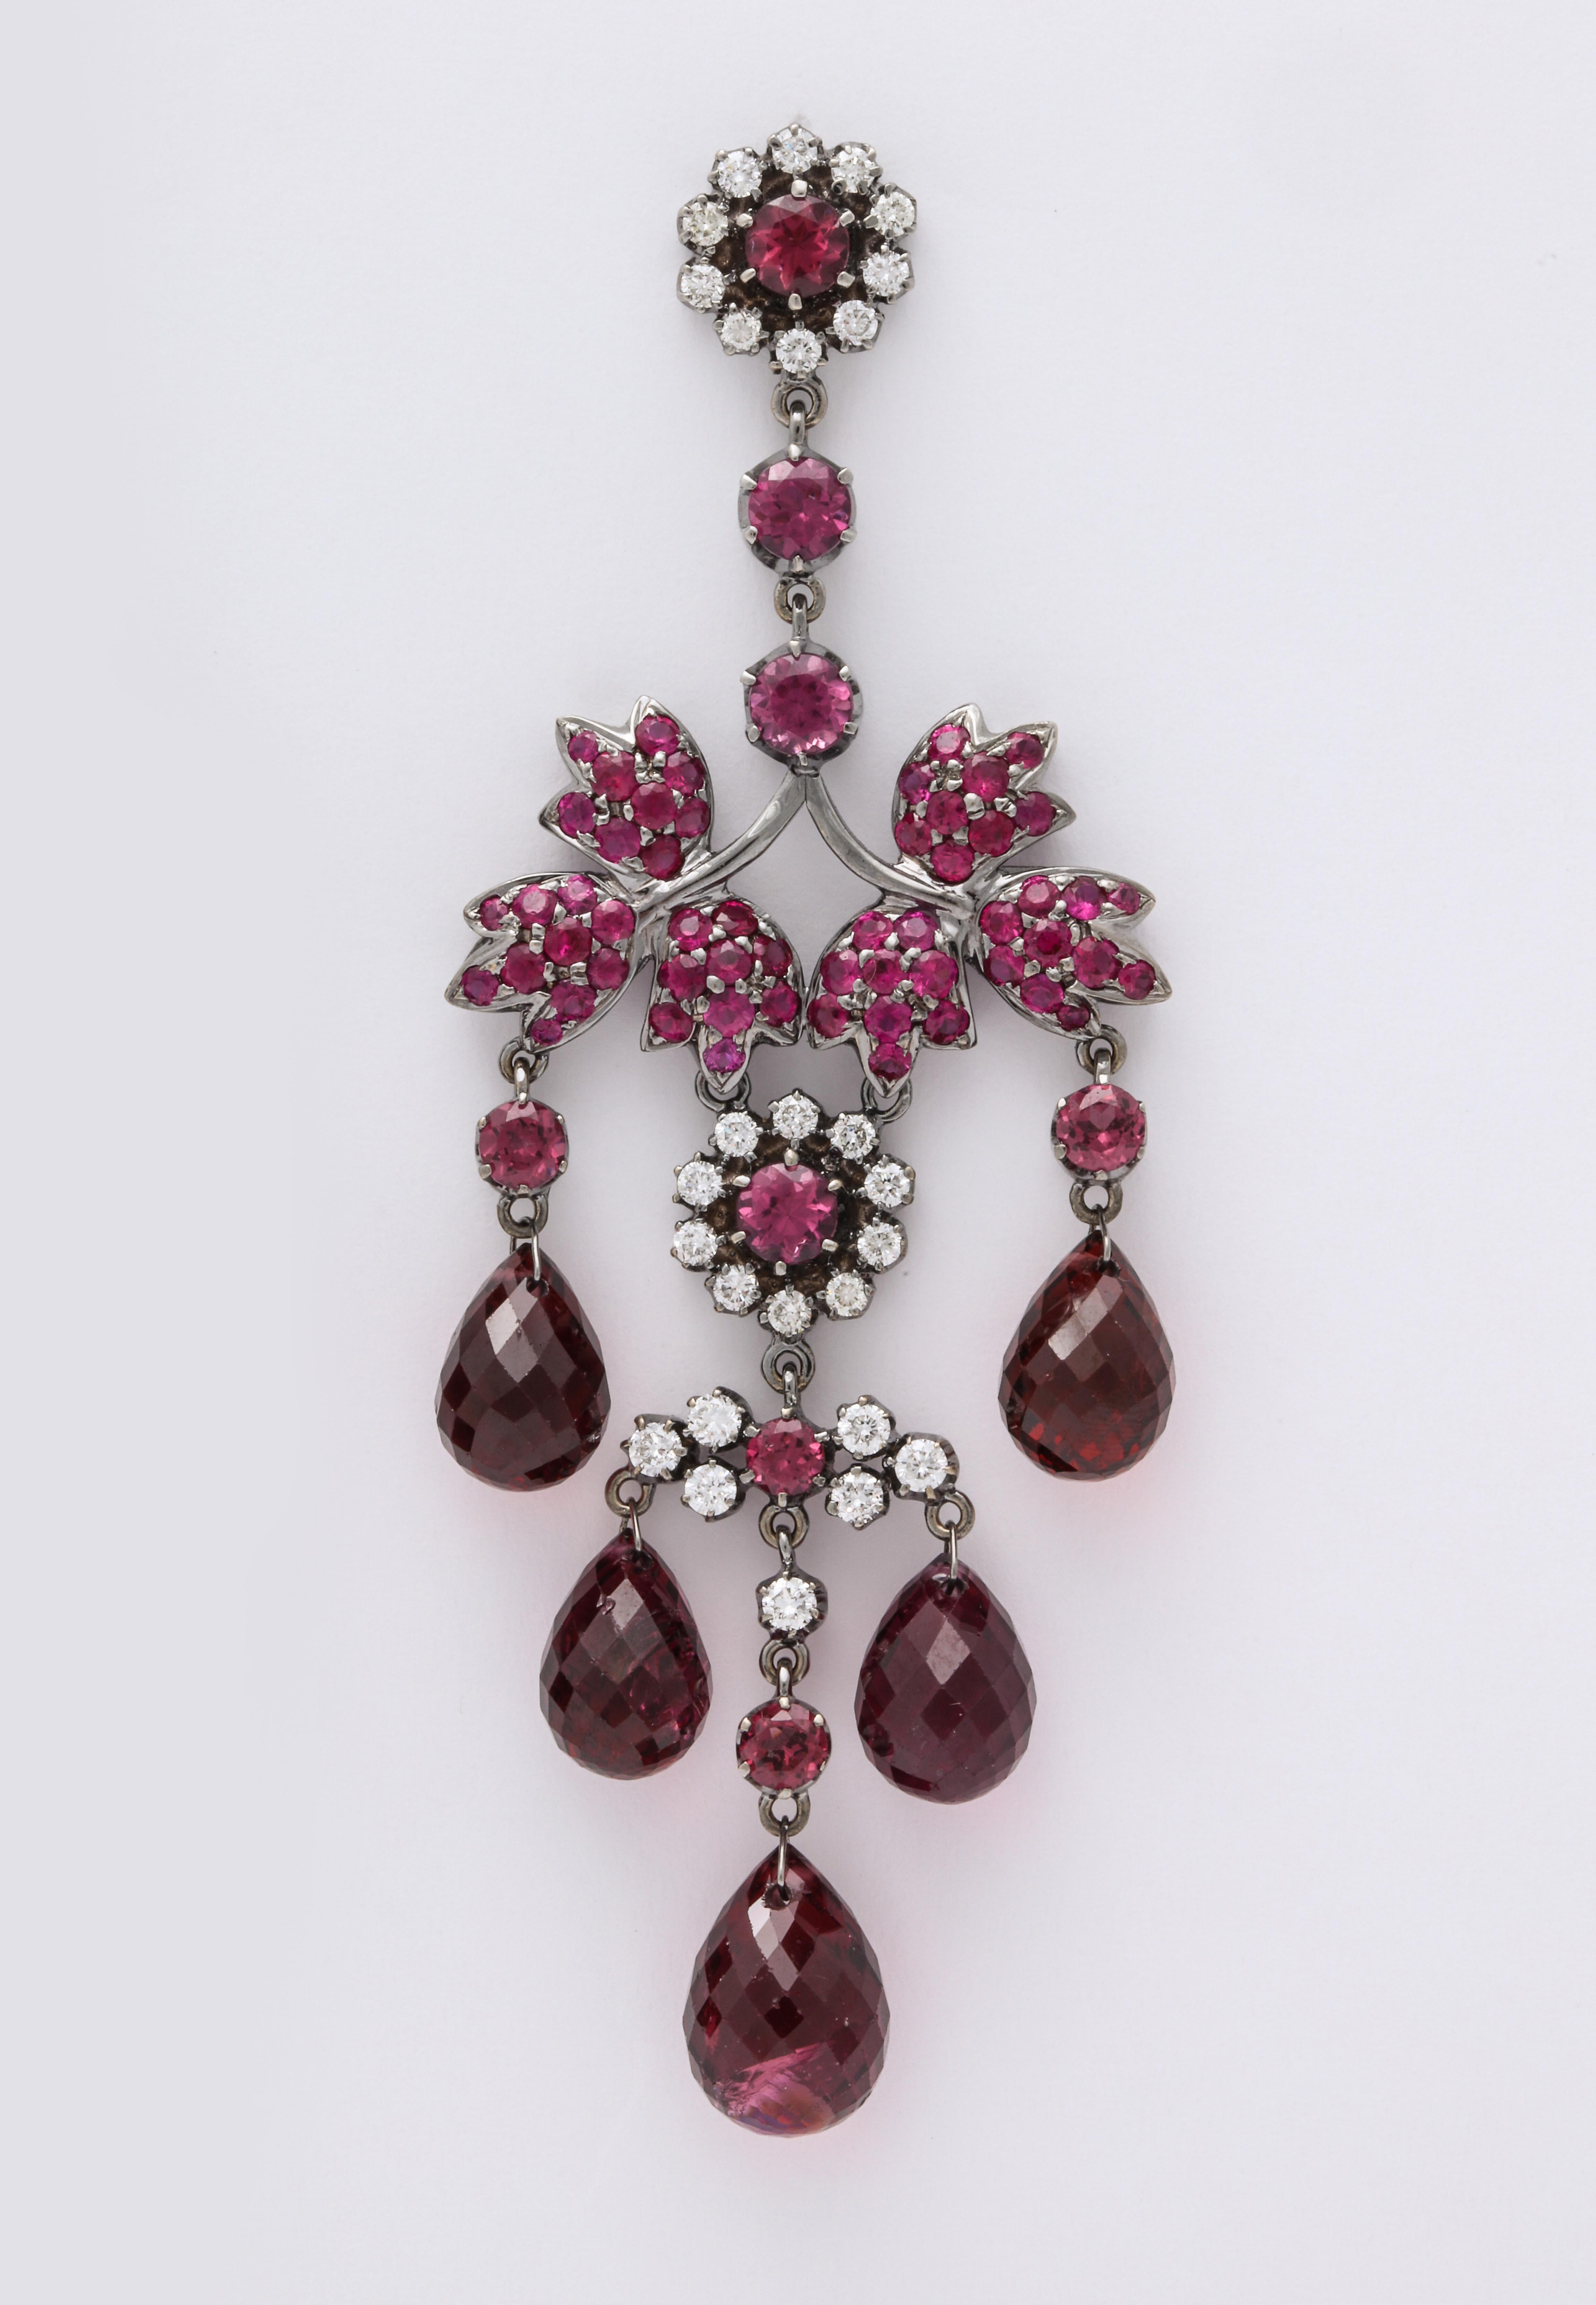 Romance revival and floral-chic 18K white gold chandelier earrings with a Gothic black rhodium wash for high impact COLOR POP, composed of stylized leaf motifs decorated with round pink sapphire: 3.32 carats, round diamond-cut pink tourmaline: 4.05